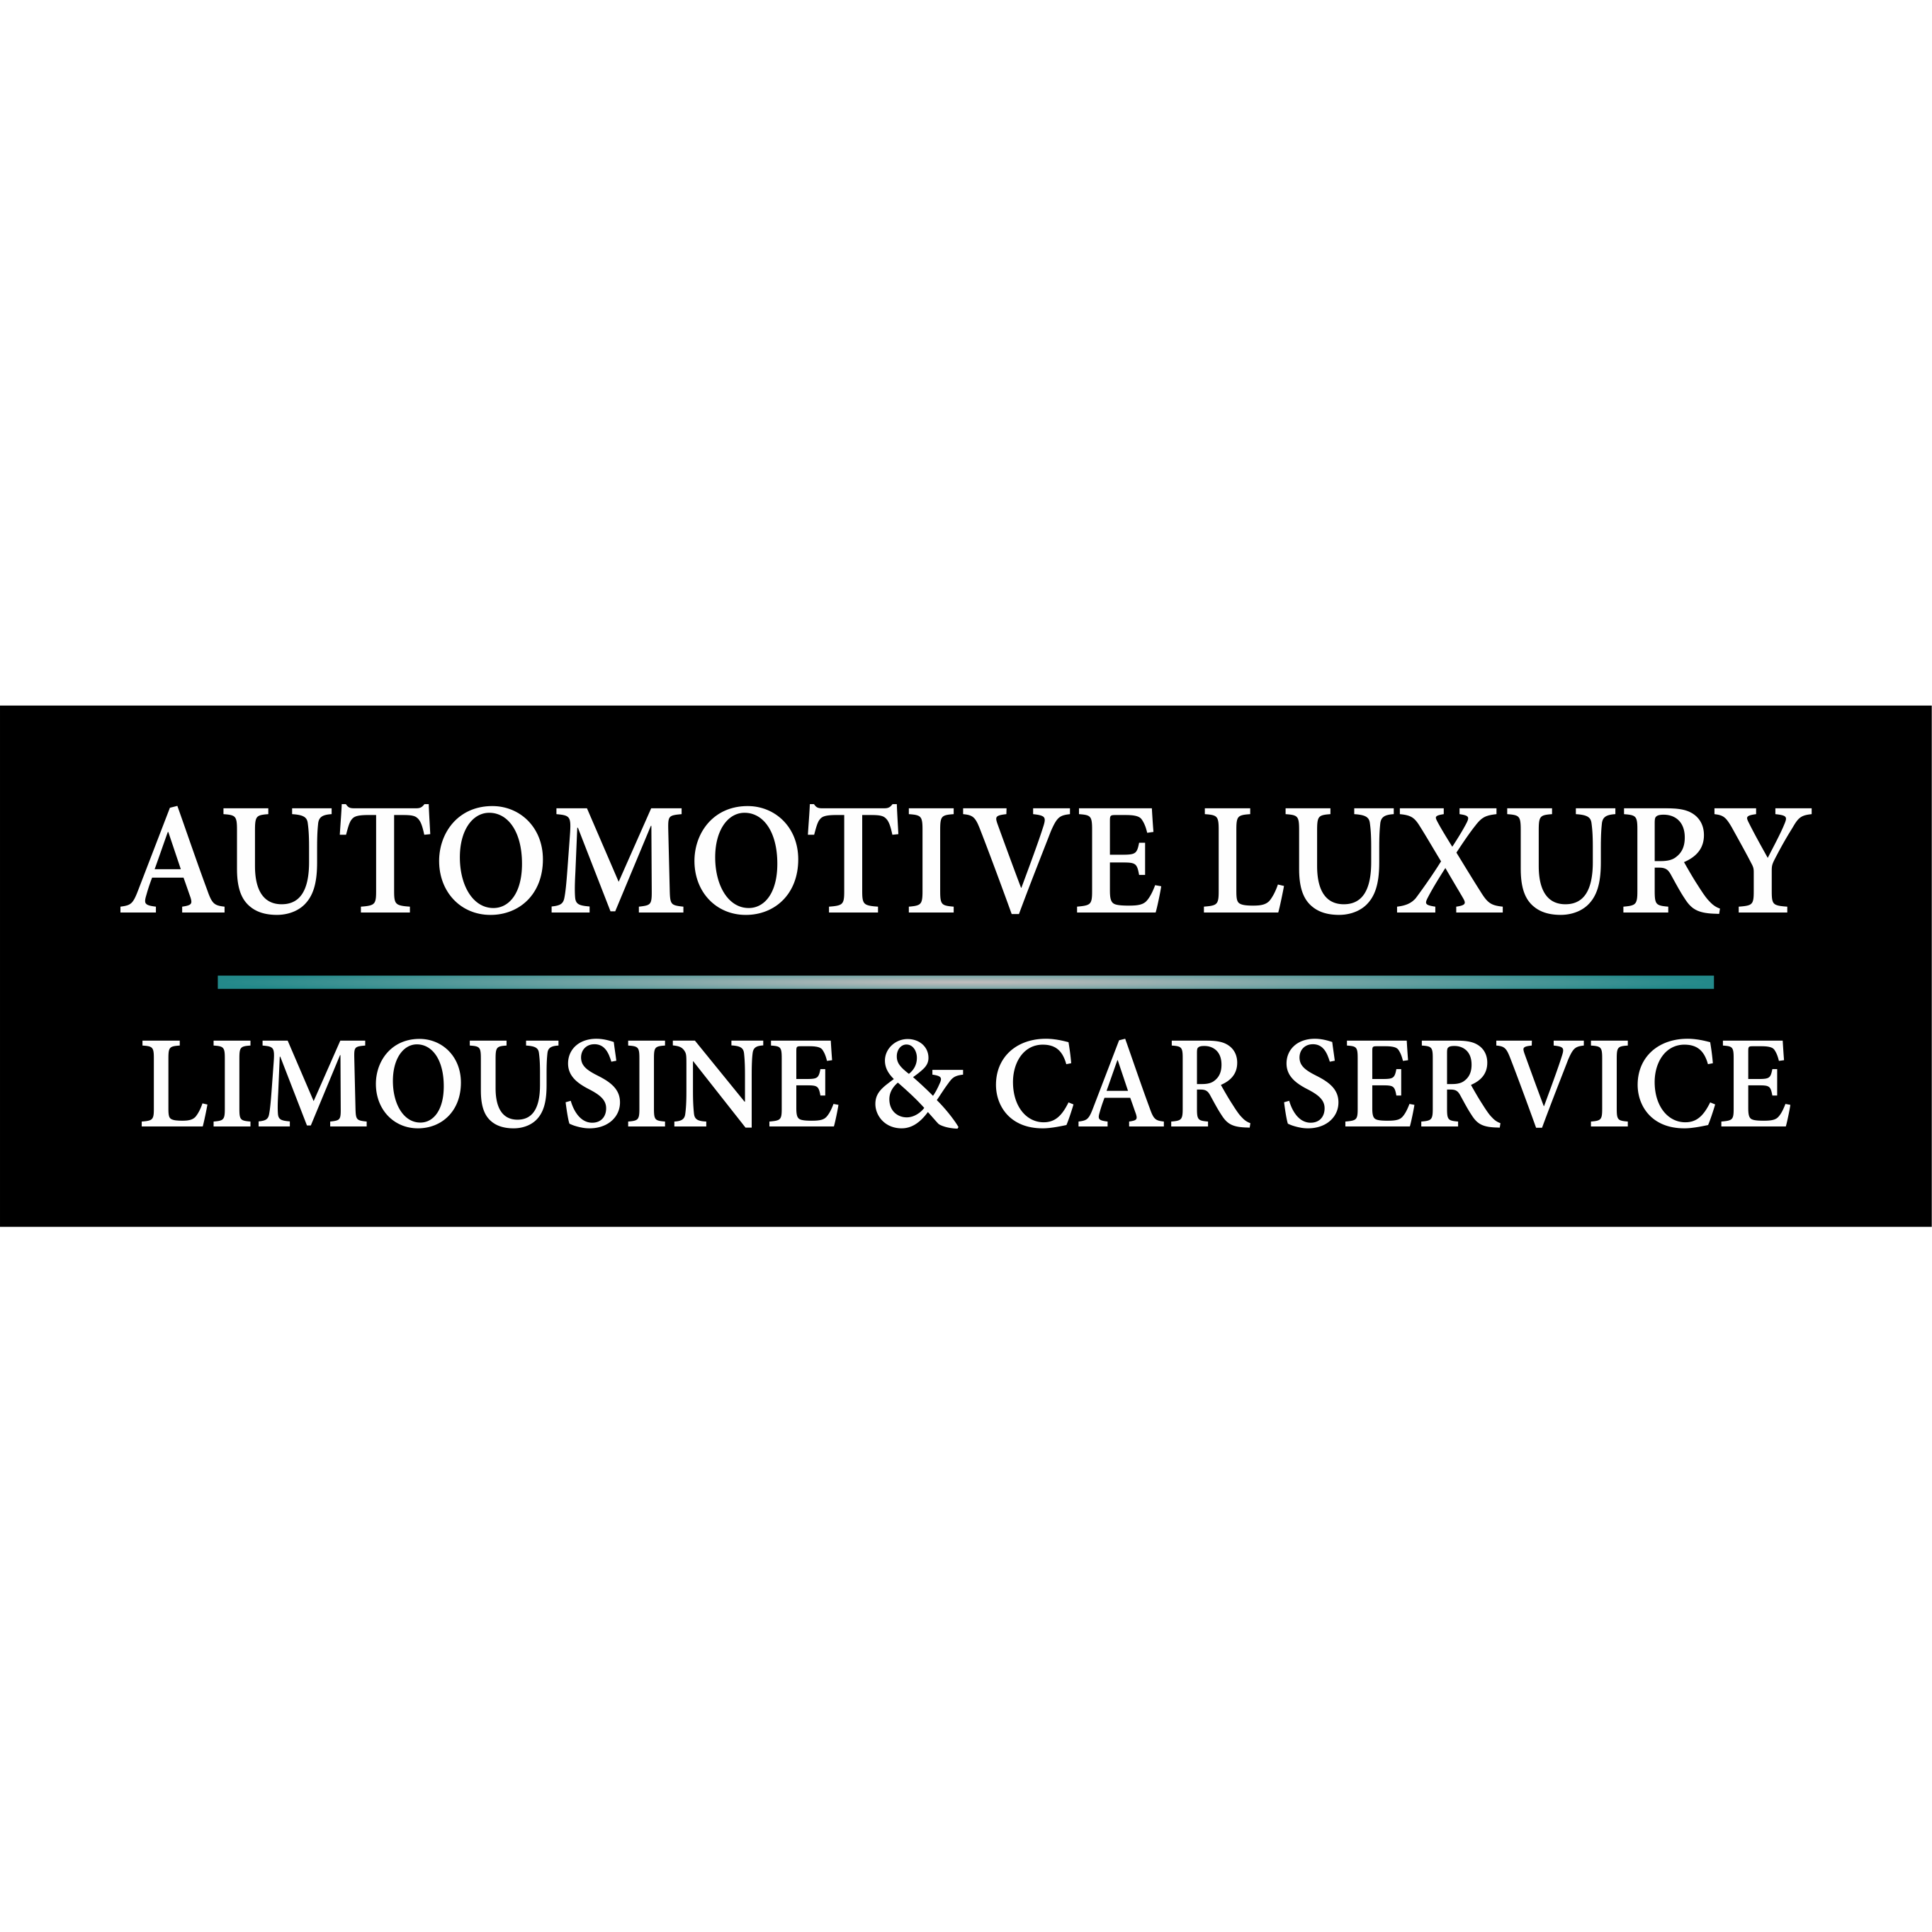 Automotive Luxury Limo and Car Service - New York, NY 10018 - (800)516-1134 | ShowMeLocal.com